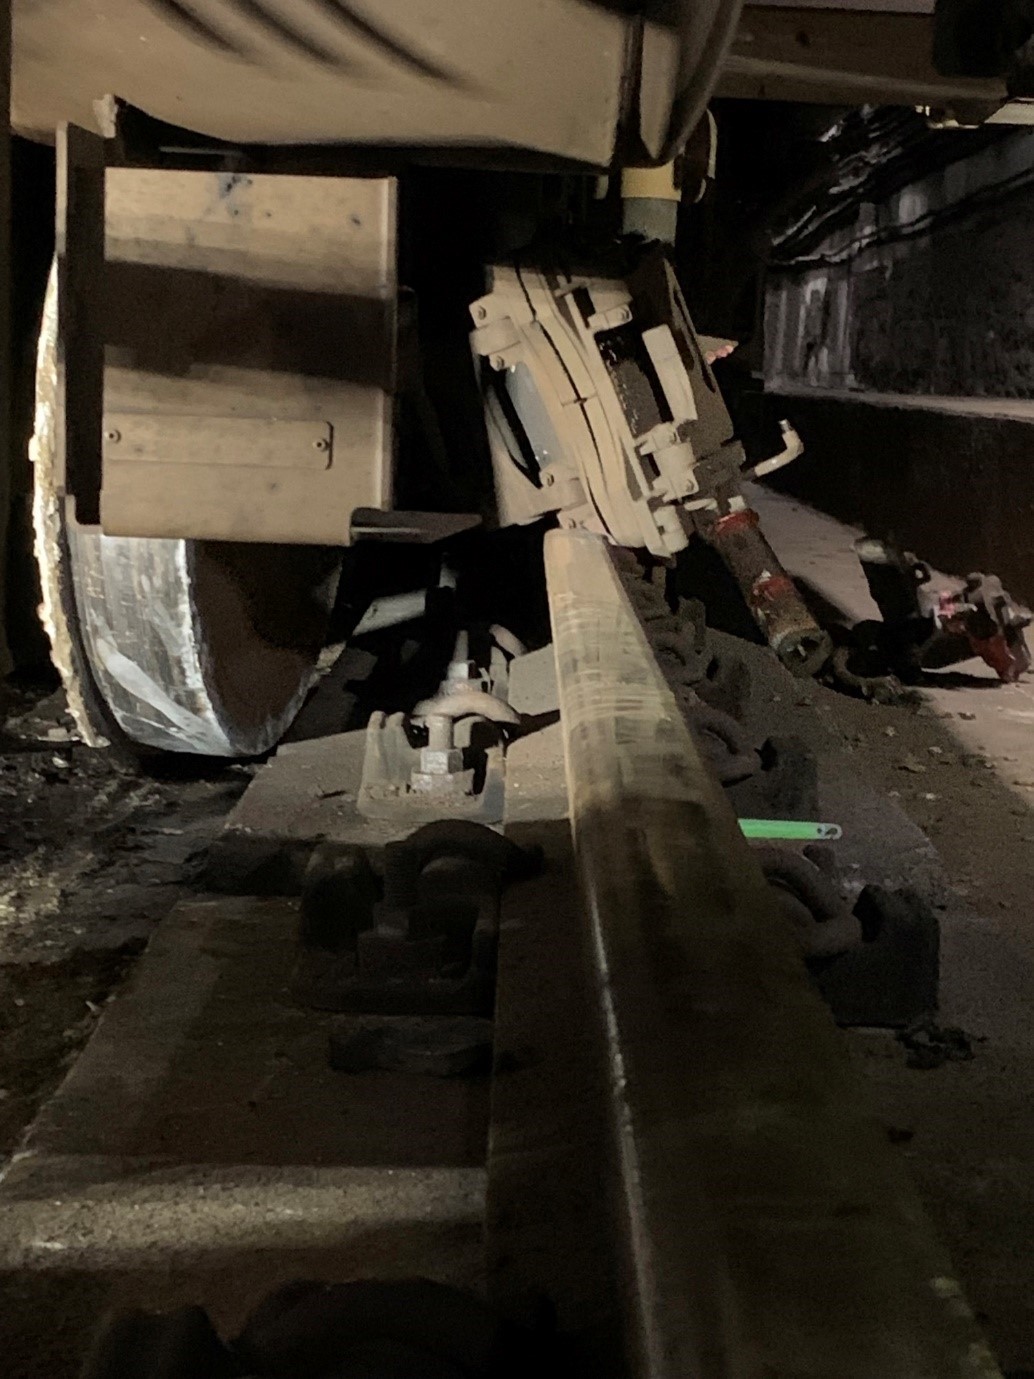 This photo shows the lead axle at the final derailment site in the tunnel.  